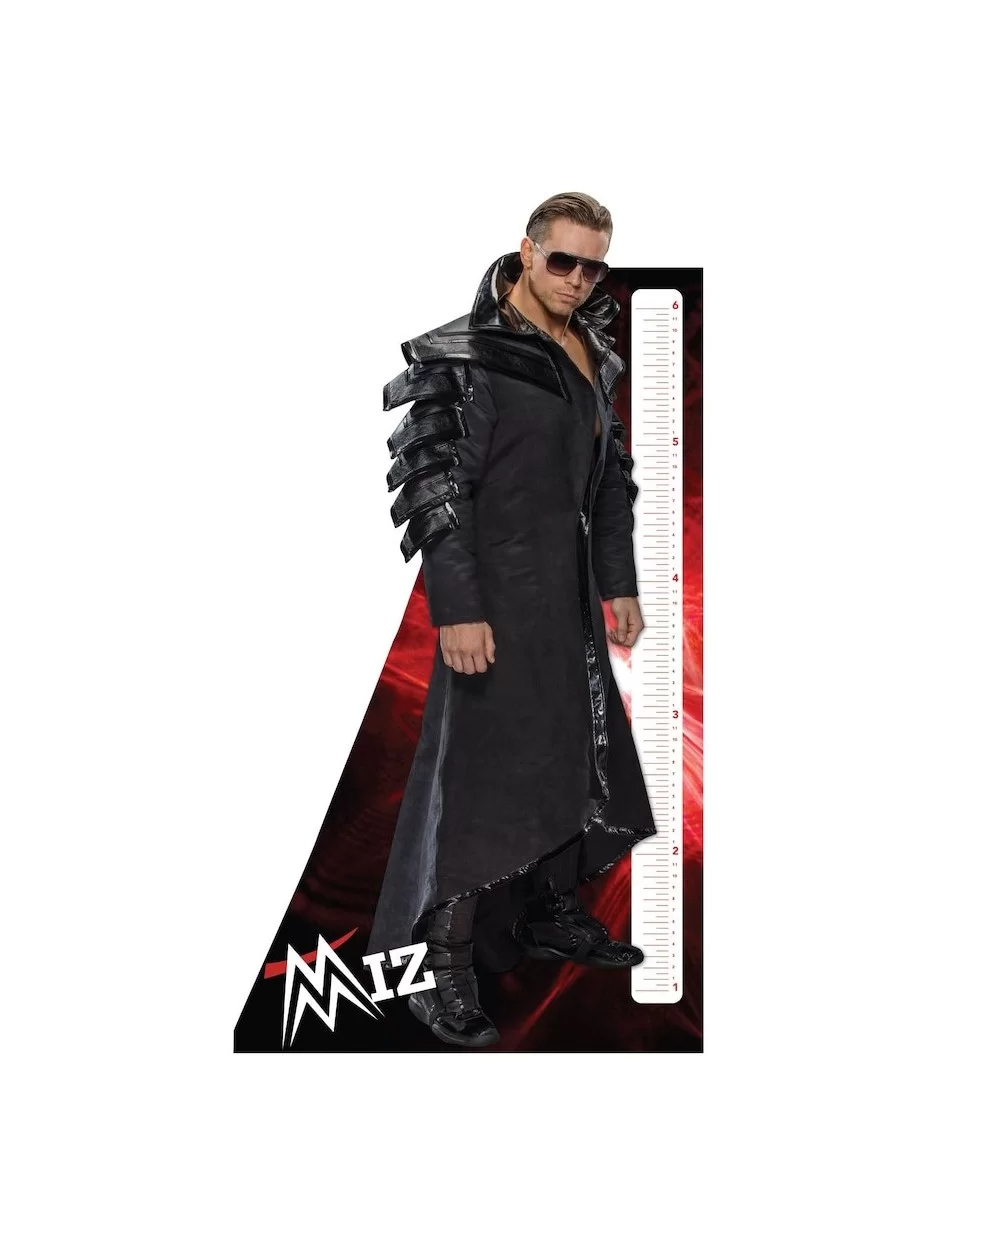 Fathead The Miz Removable Growth Chart Decal $46.00 Home & Office